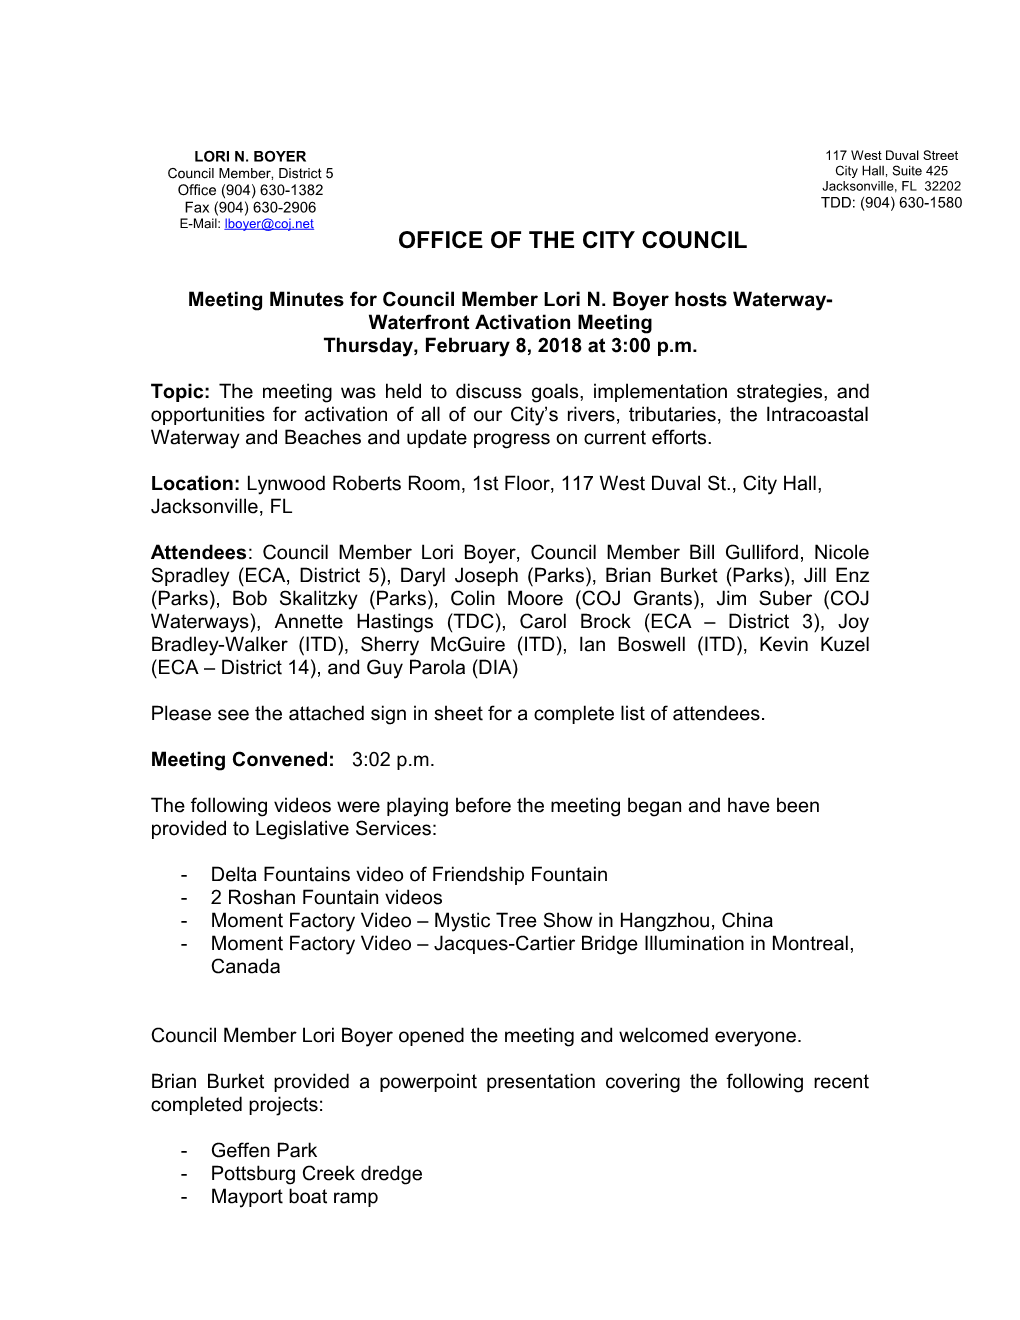 Meeting Minutes for Council Member Lori N. Boyer Hosts Waterway-Waterfront Activation Meeting